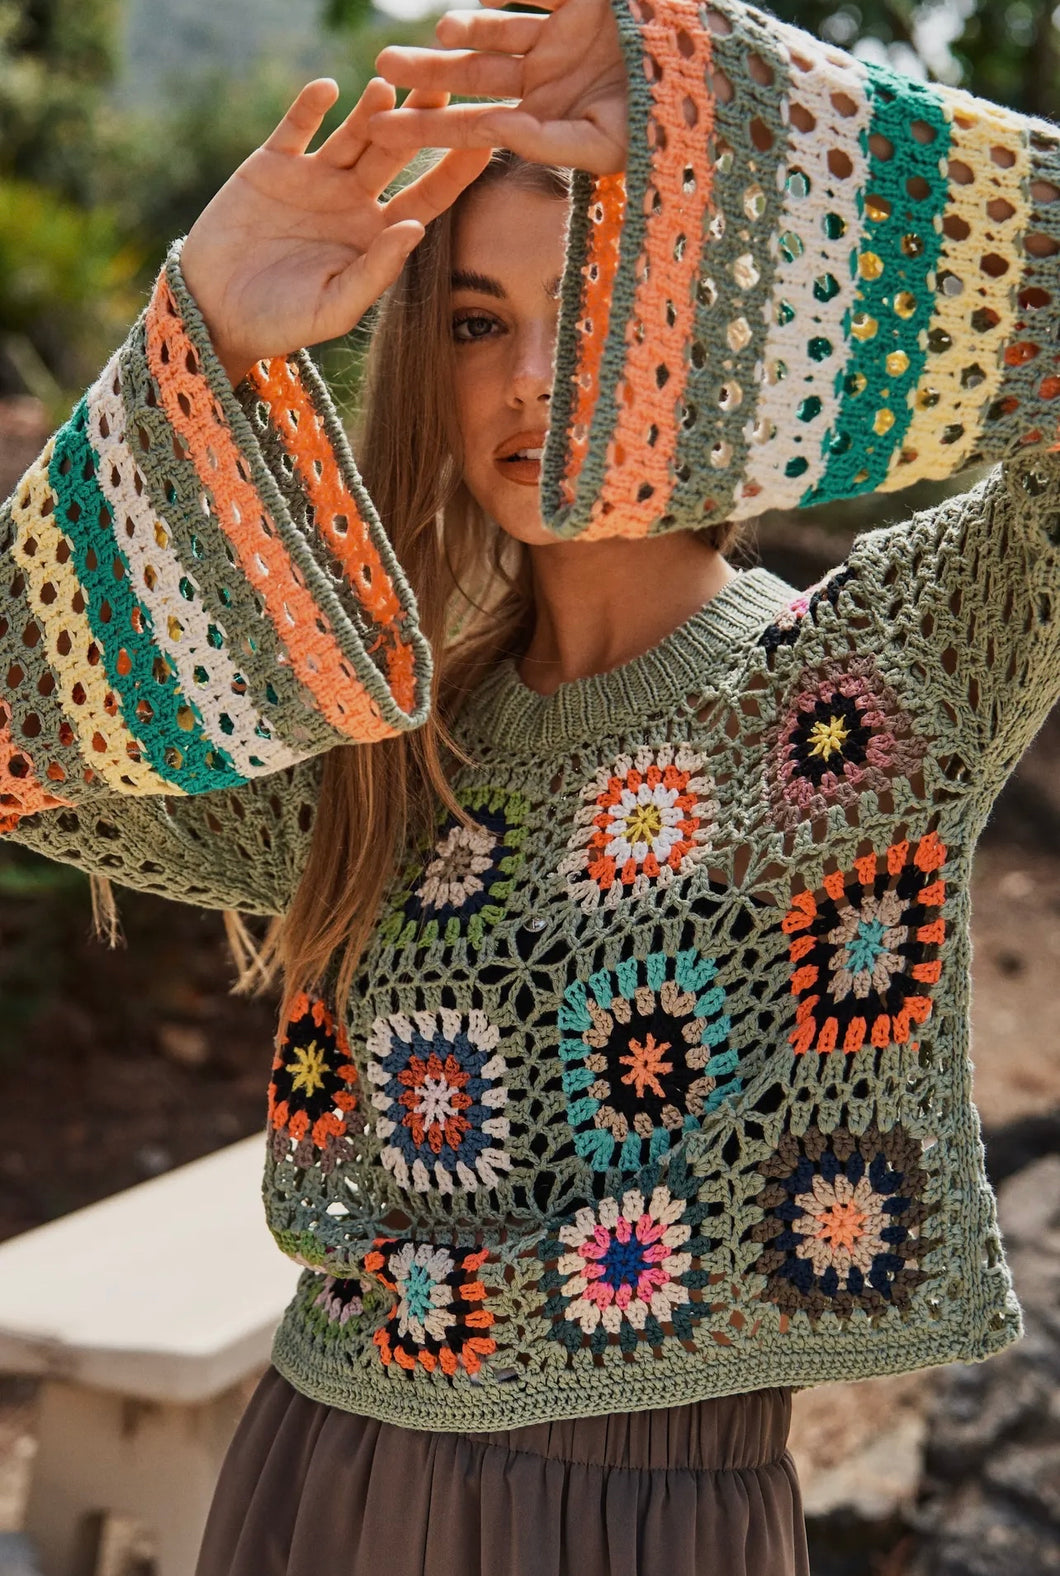 Your favorite sweater // teal granny square